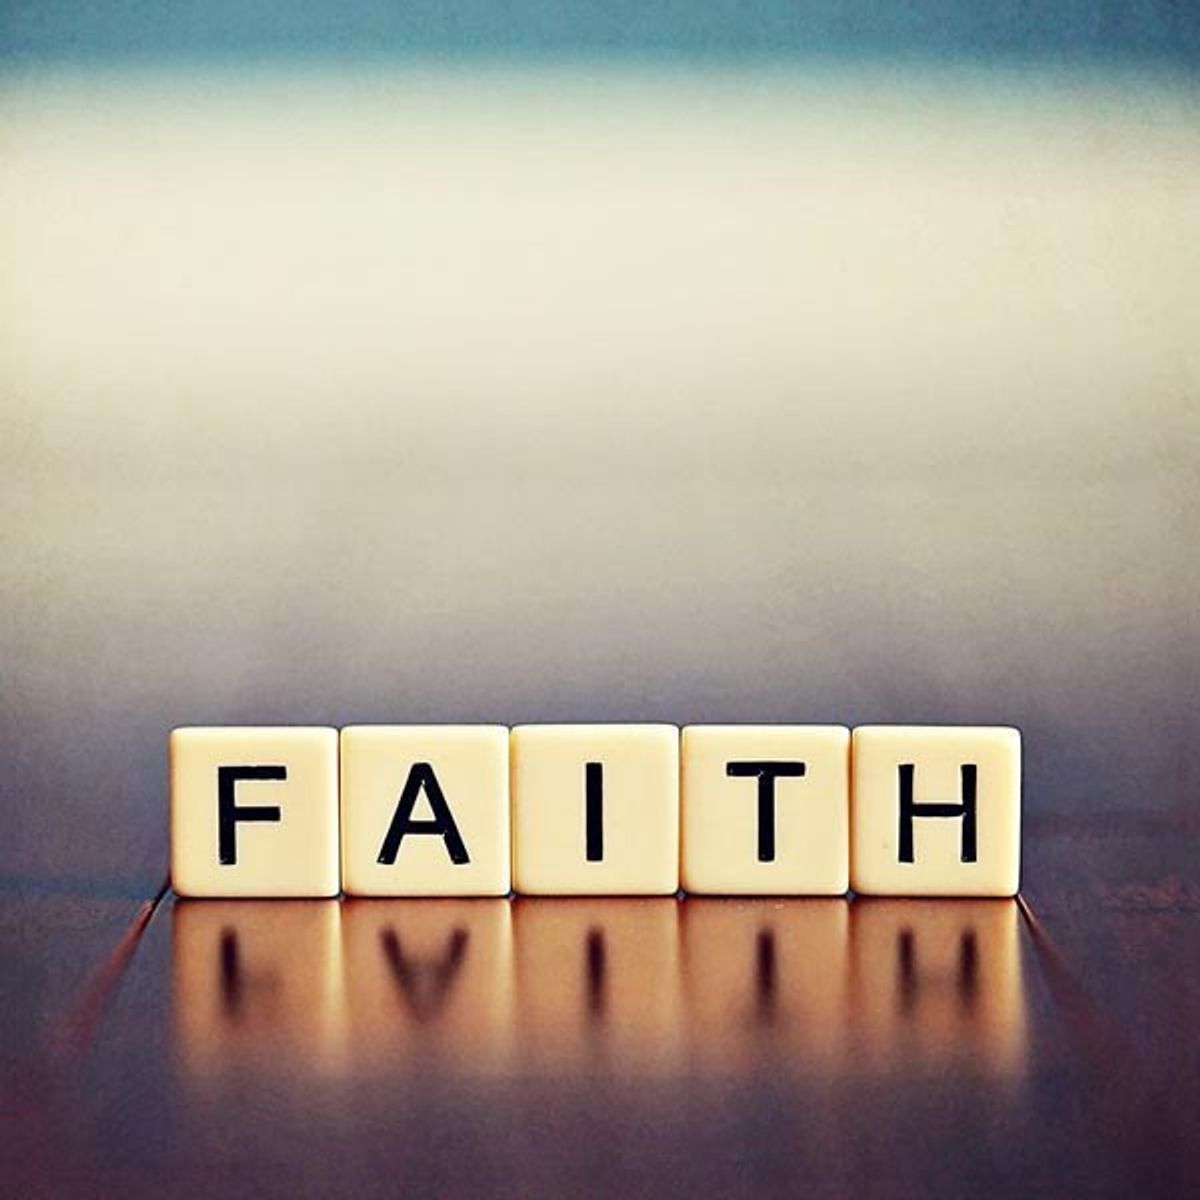 11 Reasons Why Faith Is Important